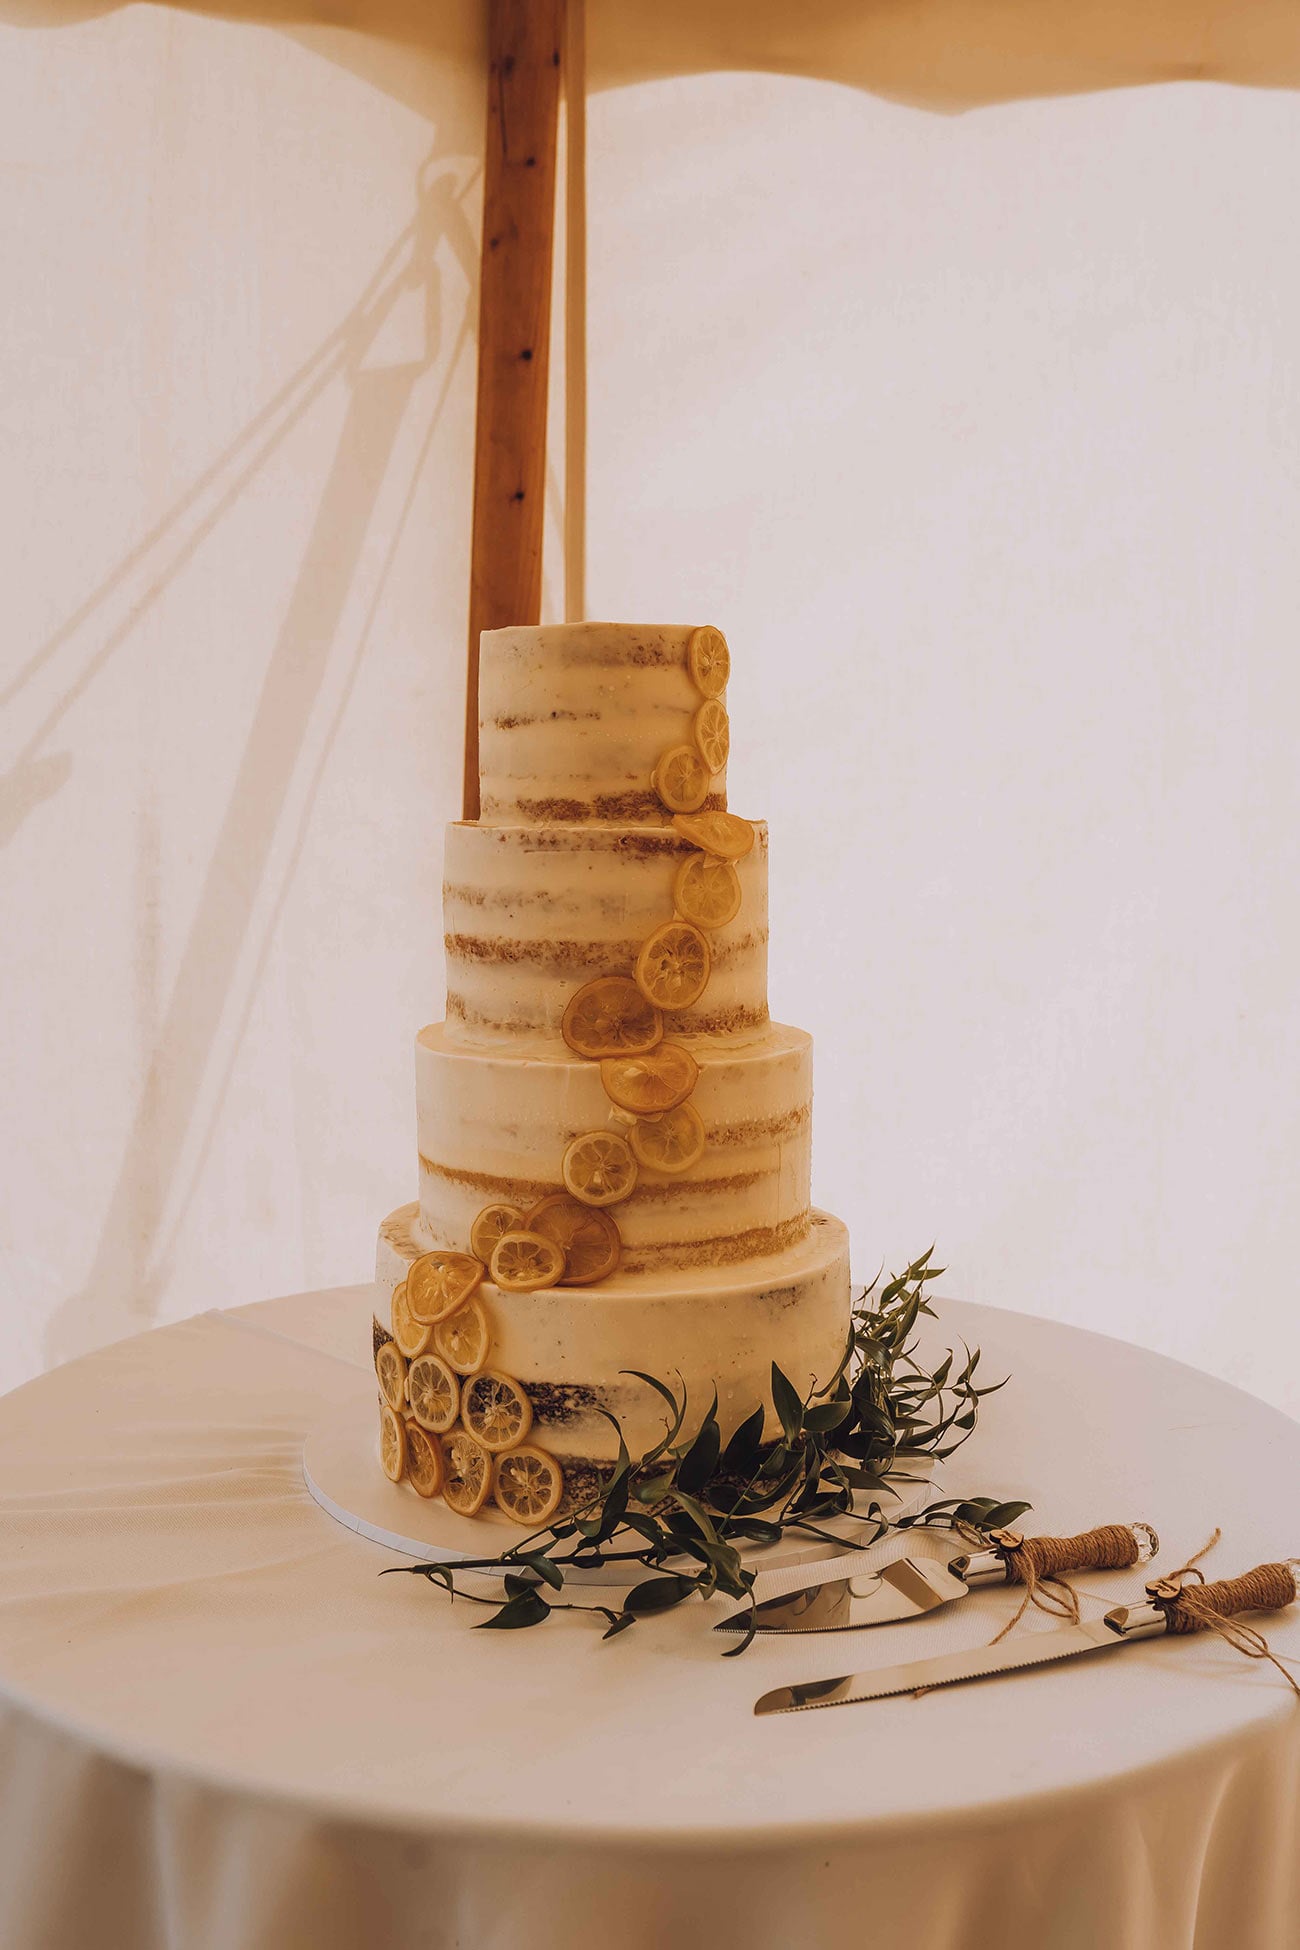 The three tiered wedding cake adorned with sliced lemons 